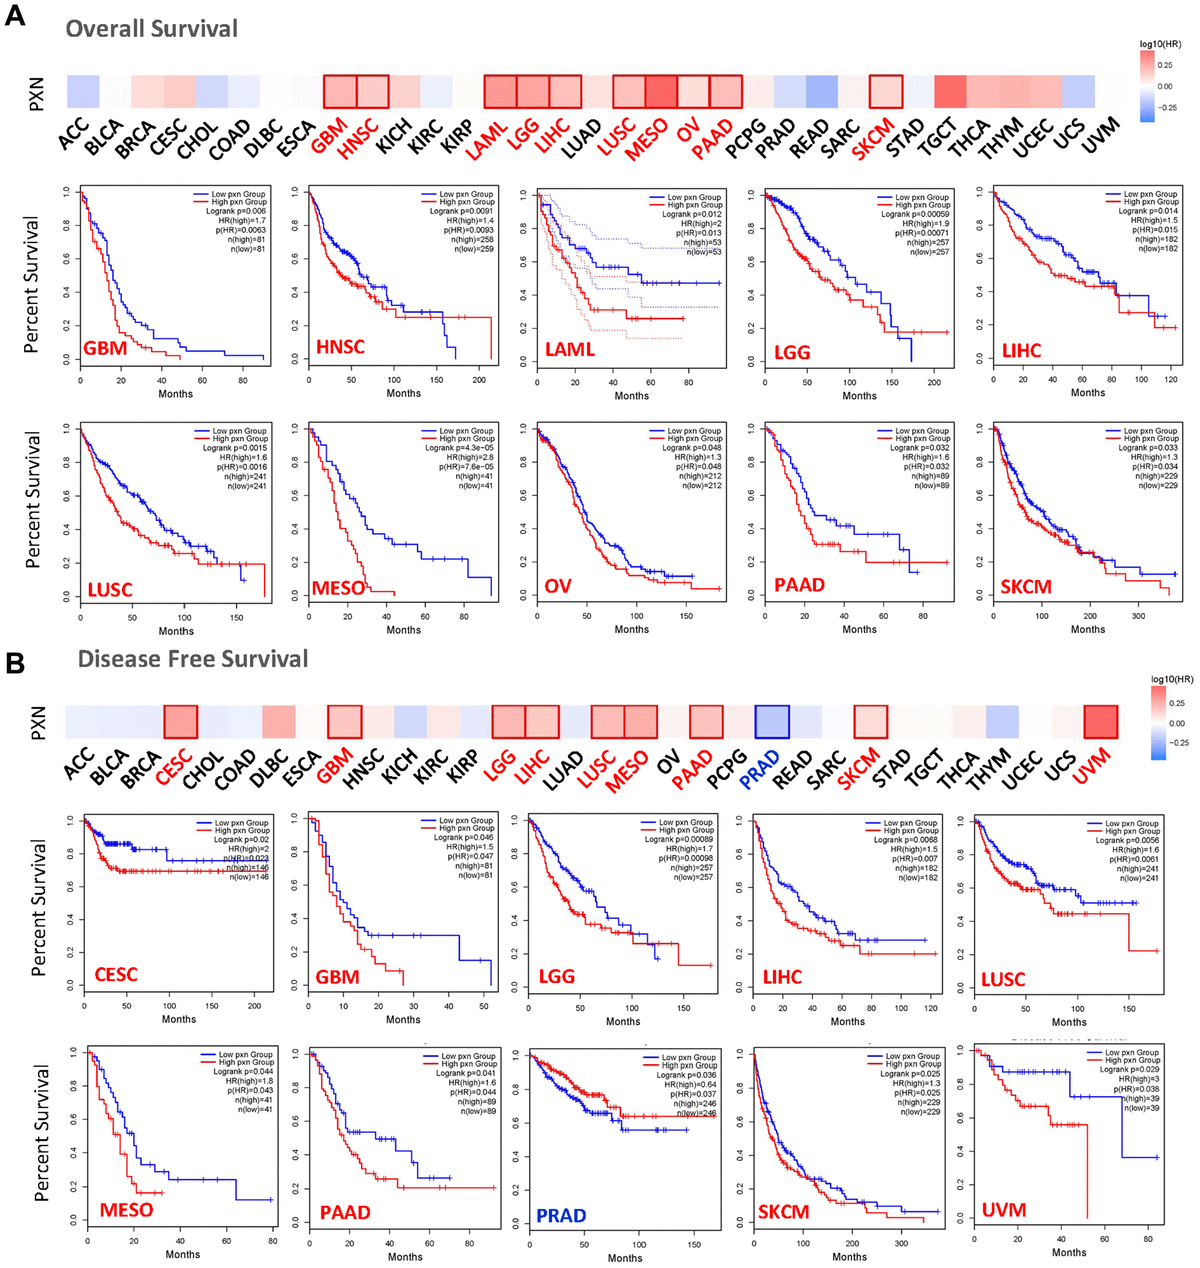 The relationship between PXN gene expression and survival prognosis of cancers in TCGA. The (A) overall survival rate and (B) disease-free survival rate, as well as PXN gene expression in different tumors in TCGA, were analyzed by GEPIA2 software. The survival diagram and Kaplan-Meier curves with positive results are shown.